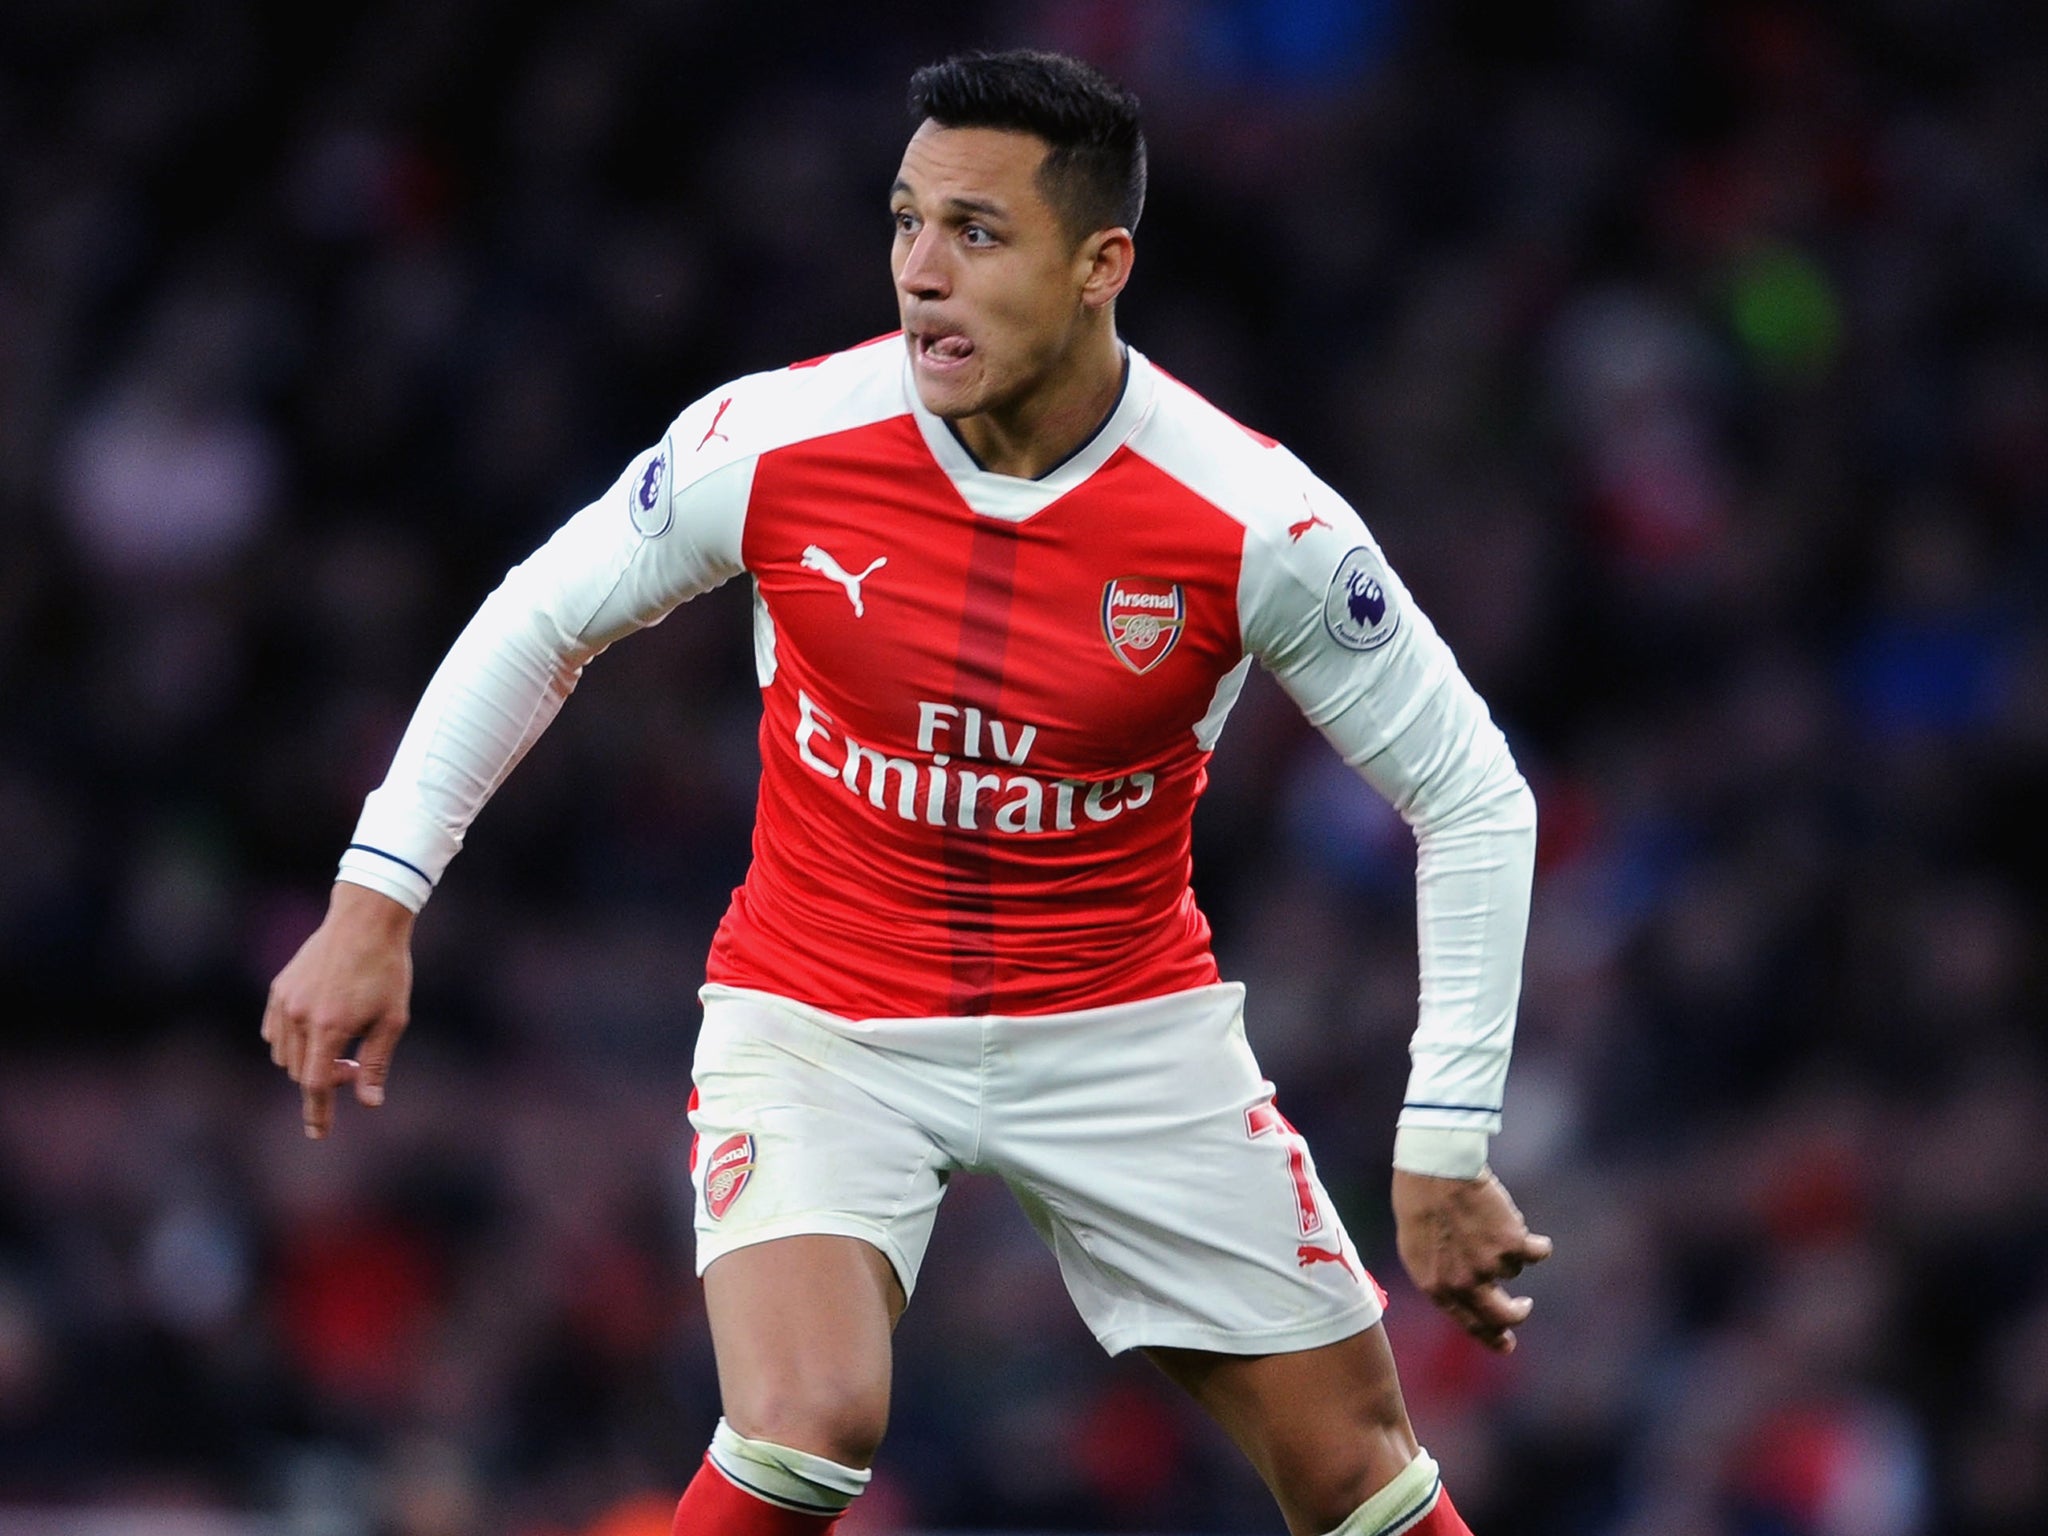 Sanchez's future at Arsenal remains up in the air